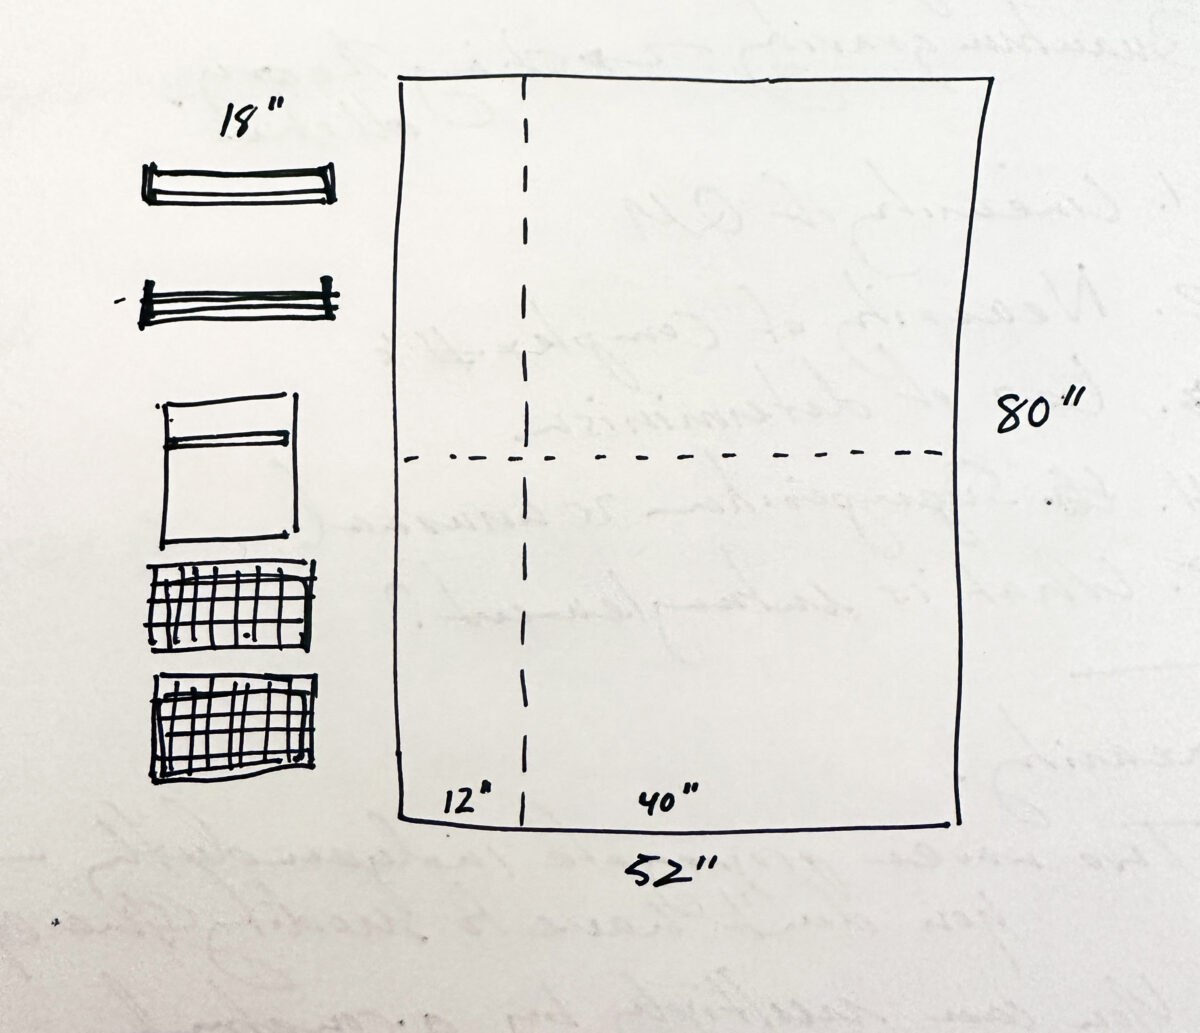 Sketch of pinboard dimensions.